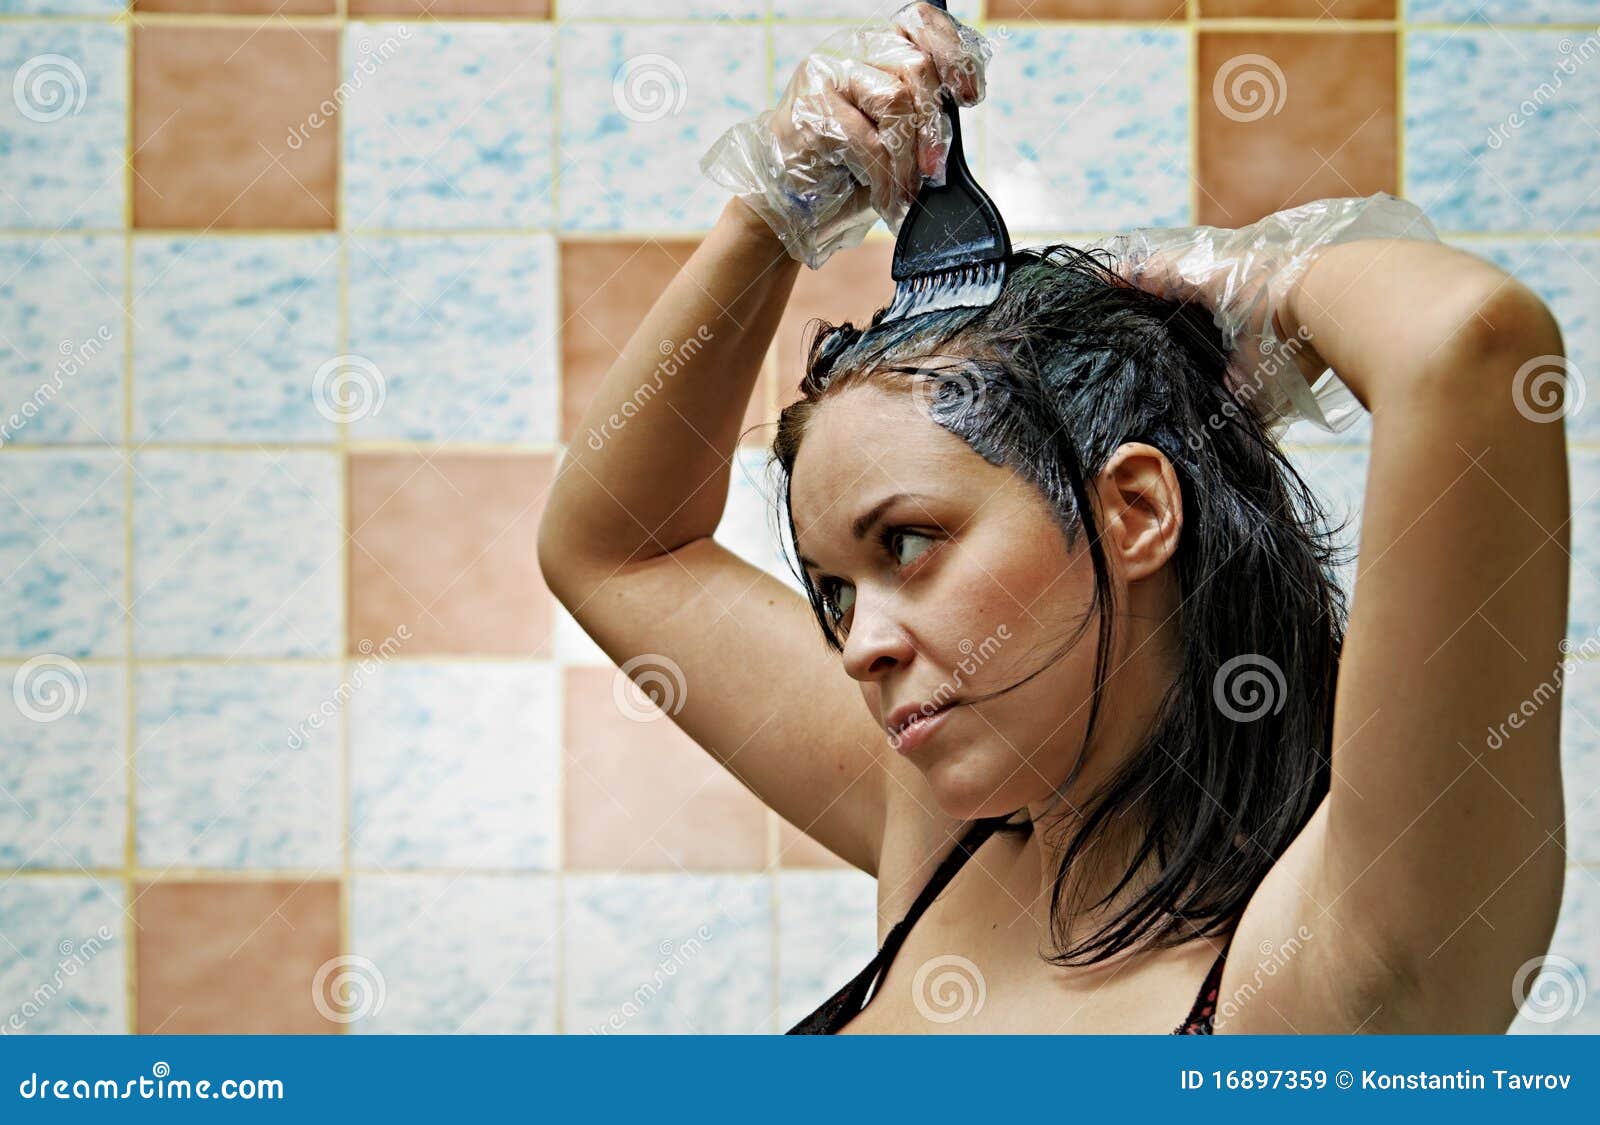 woman dyeing hairs